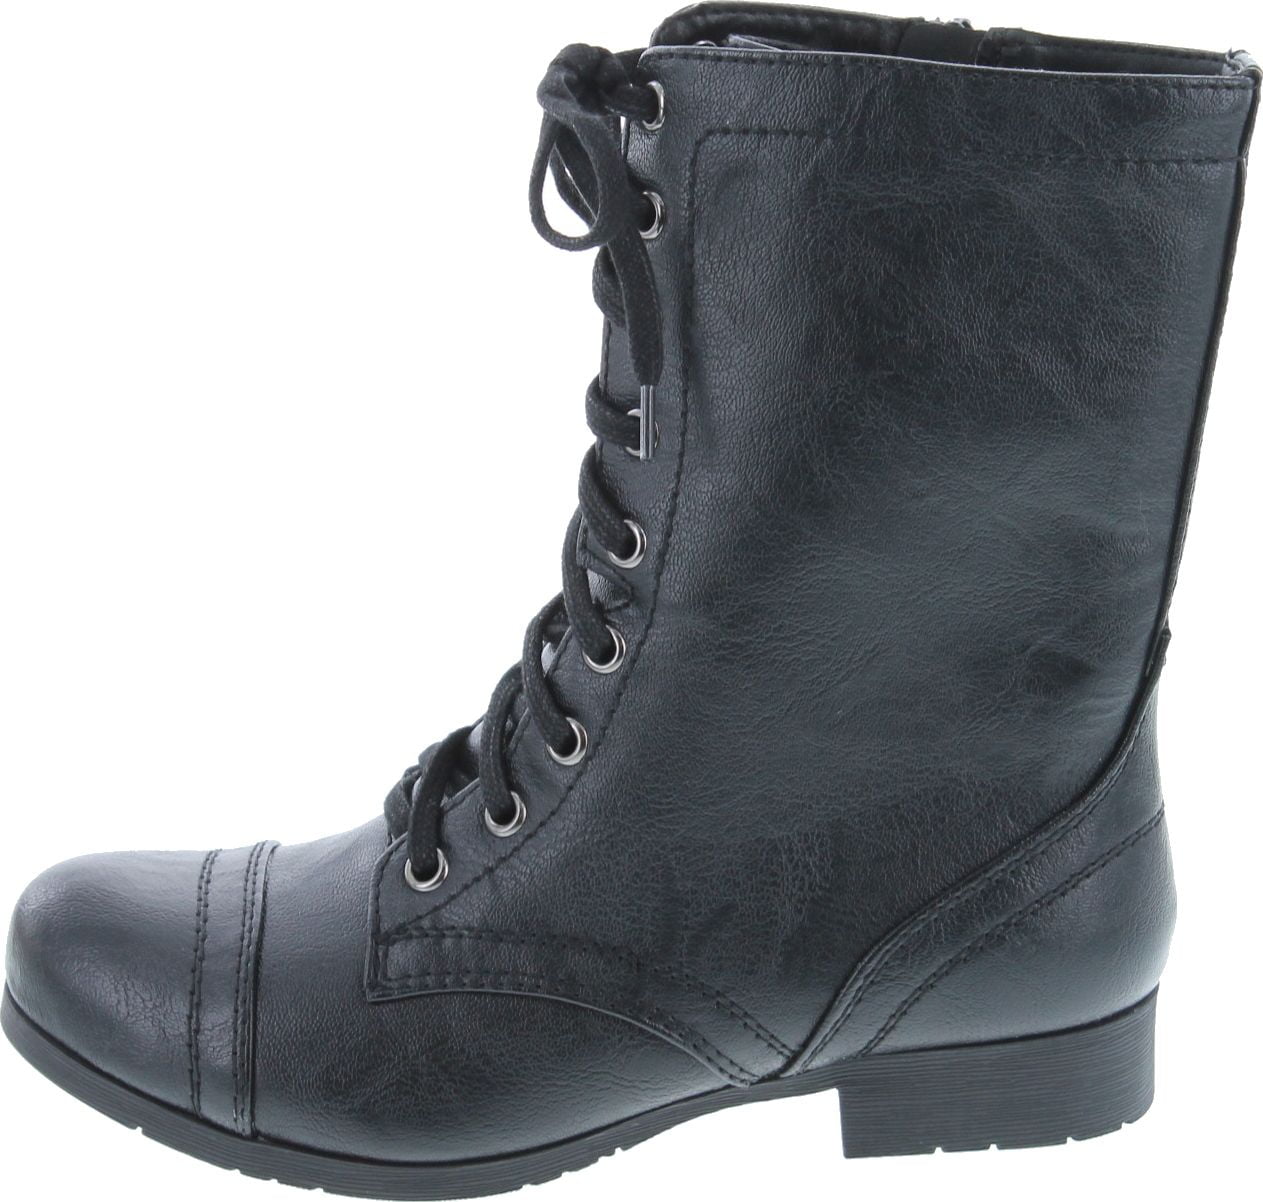 SODA WOMEN'S RELAX-S MILITARY COMBAT LACE UP BOOTS COLOR BLACK PU 